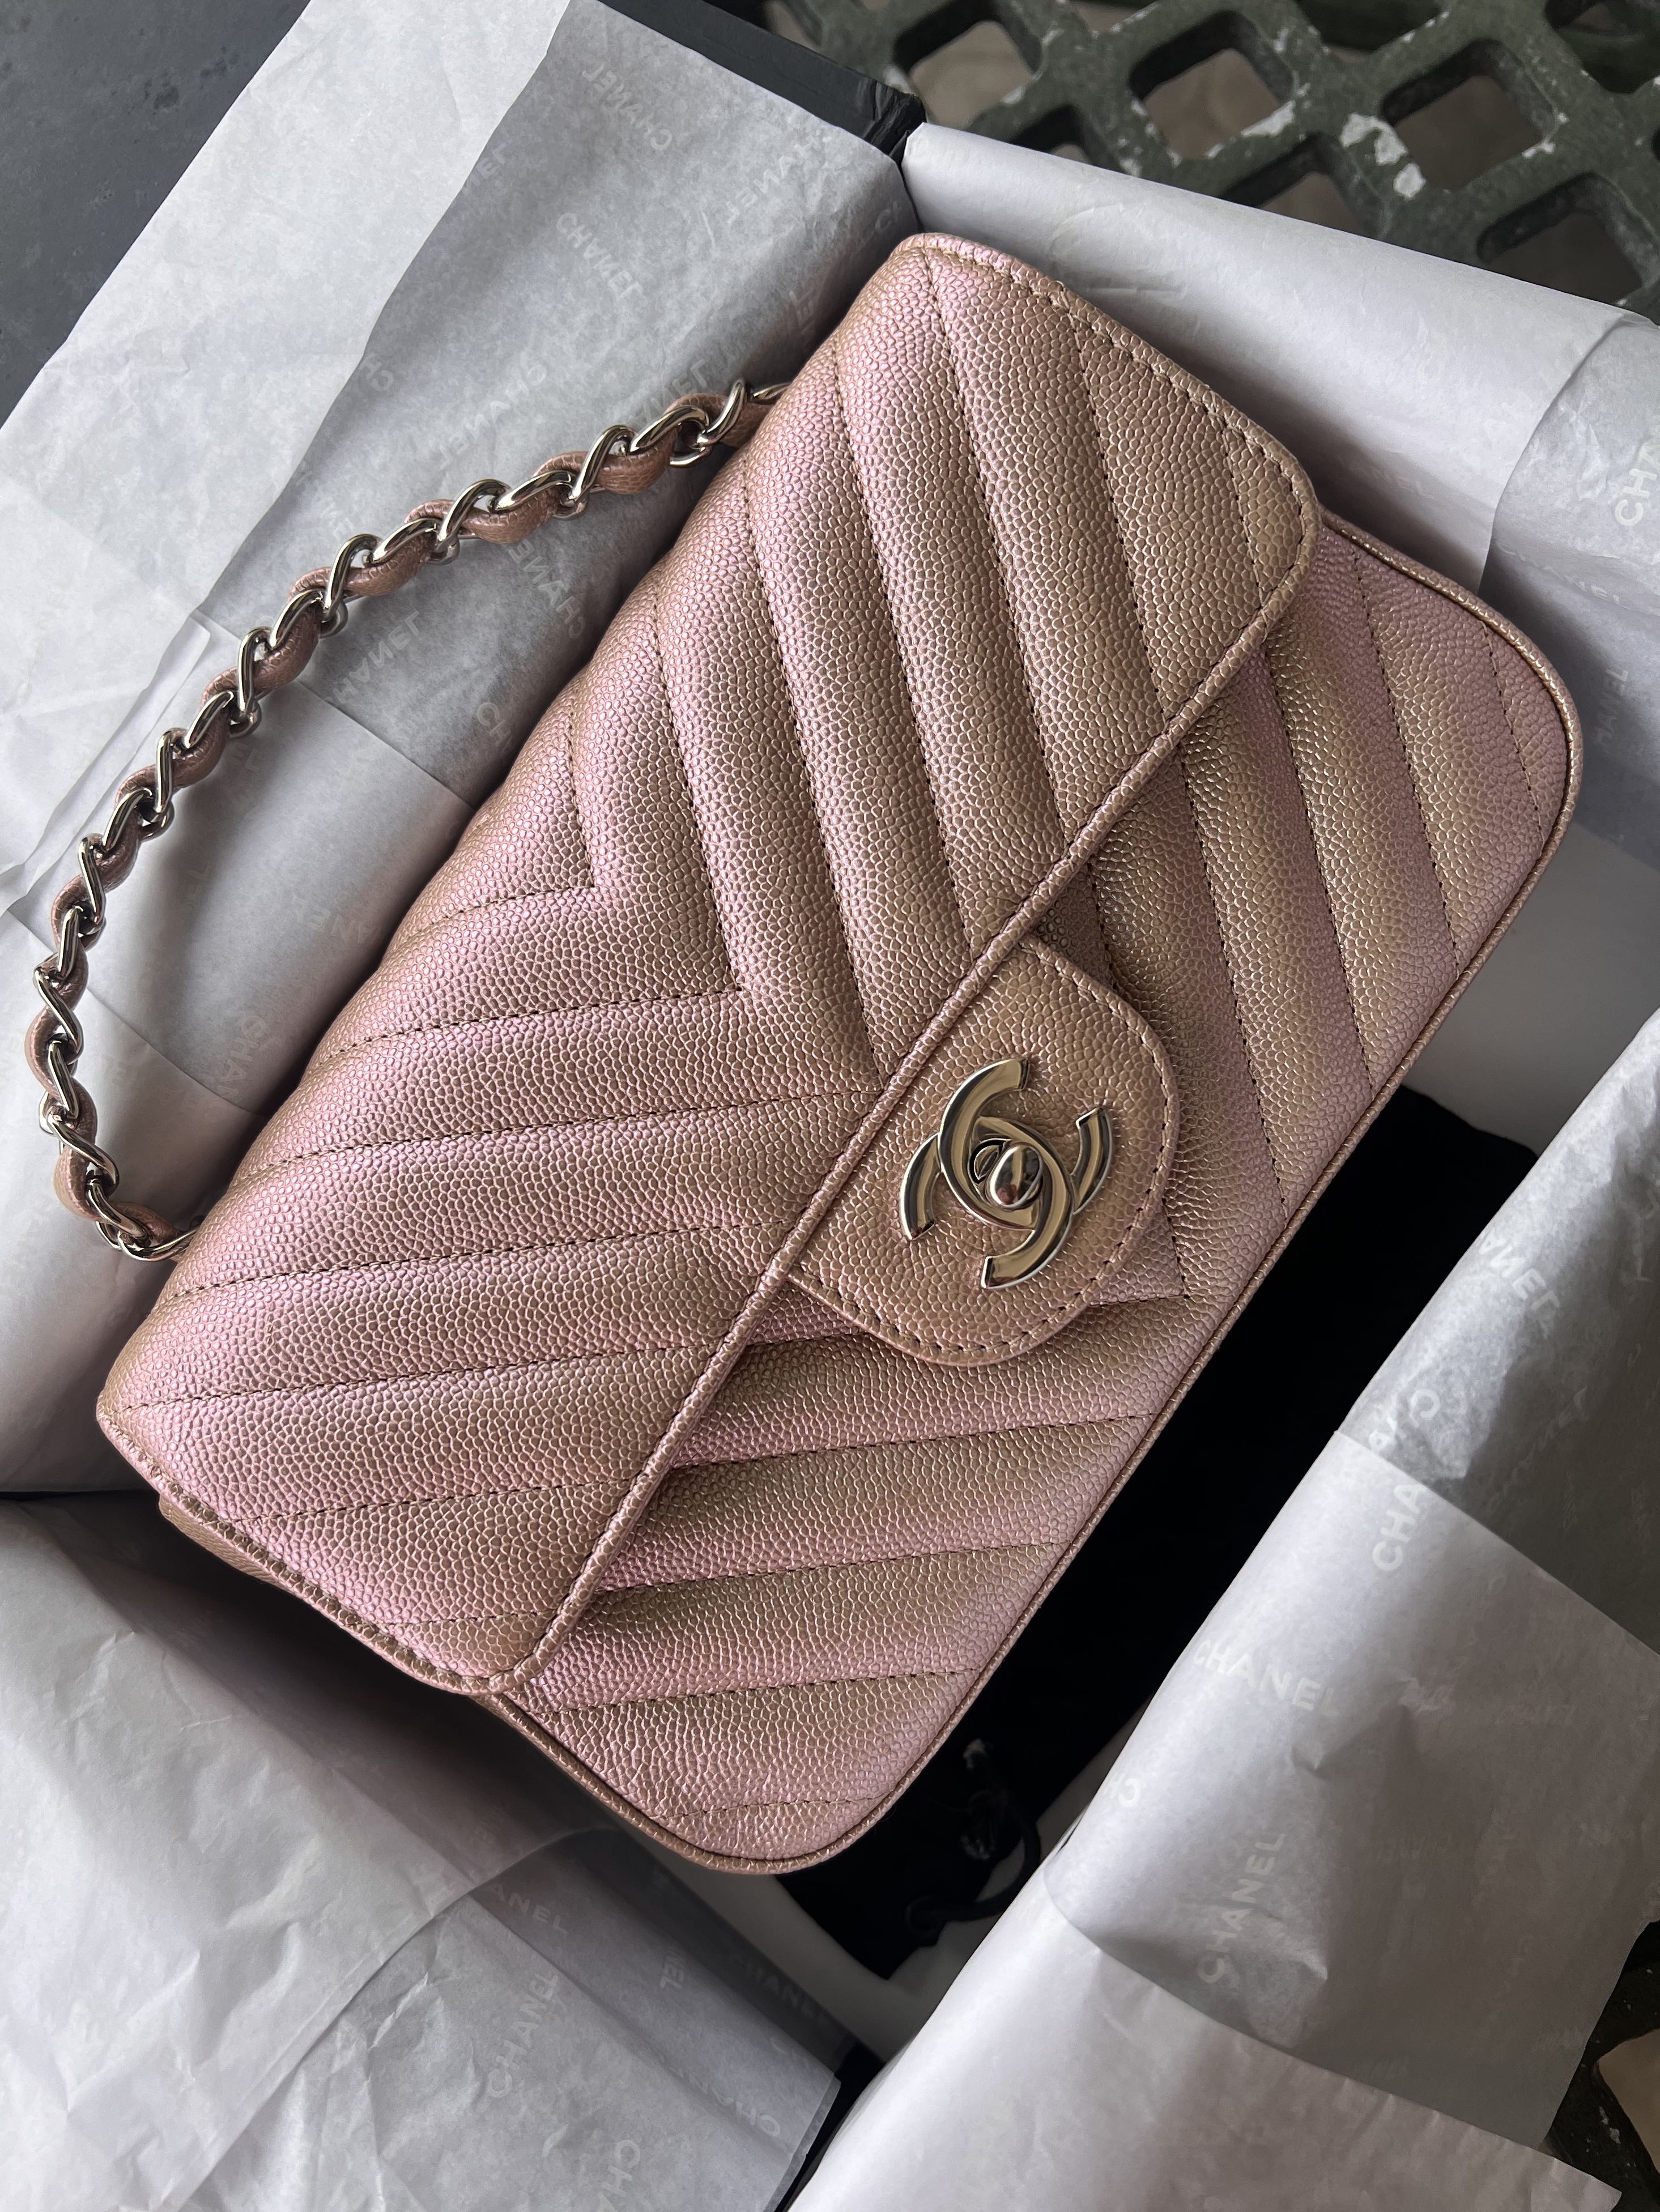 CHANEL 21A Copper (Rose Gold) 2.55 Card Holder *New - Timeless